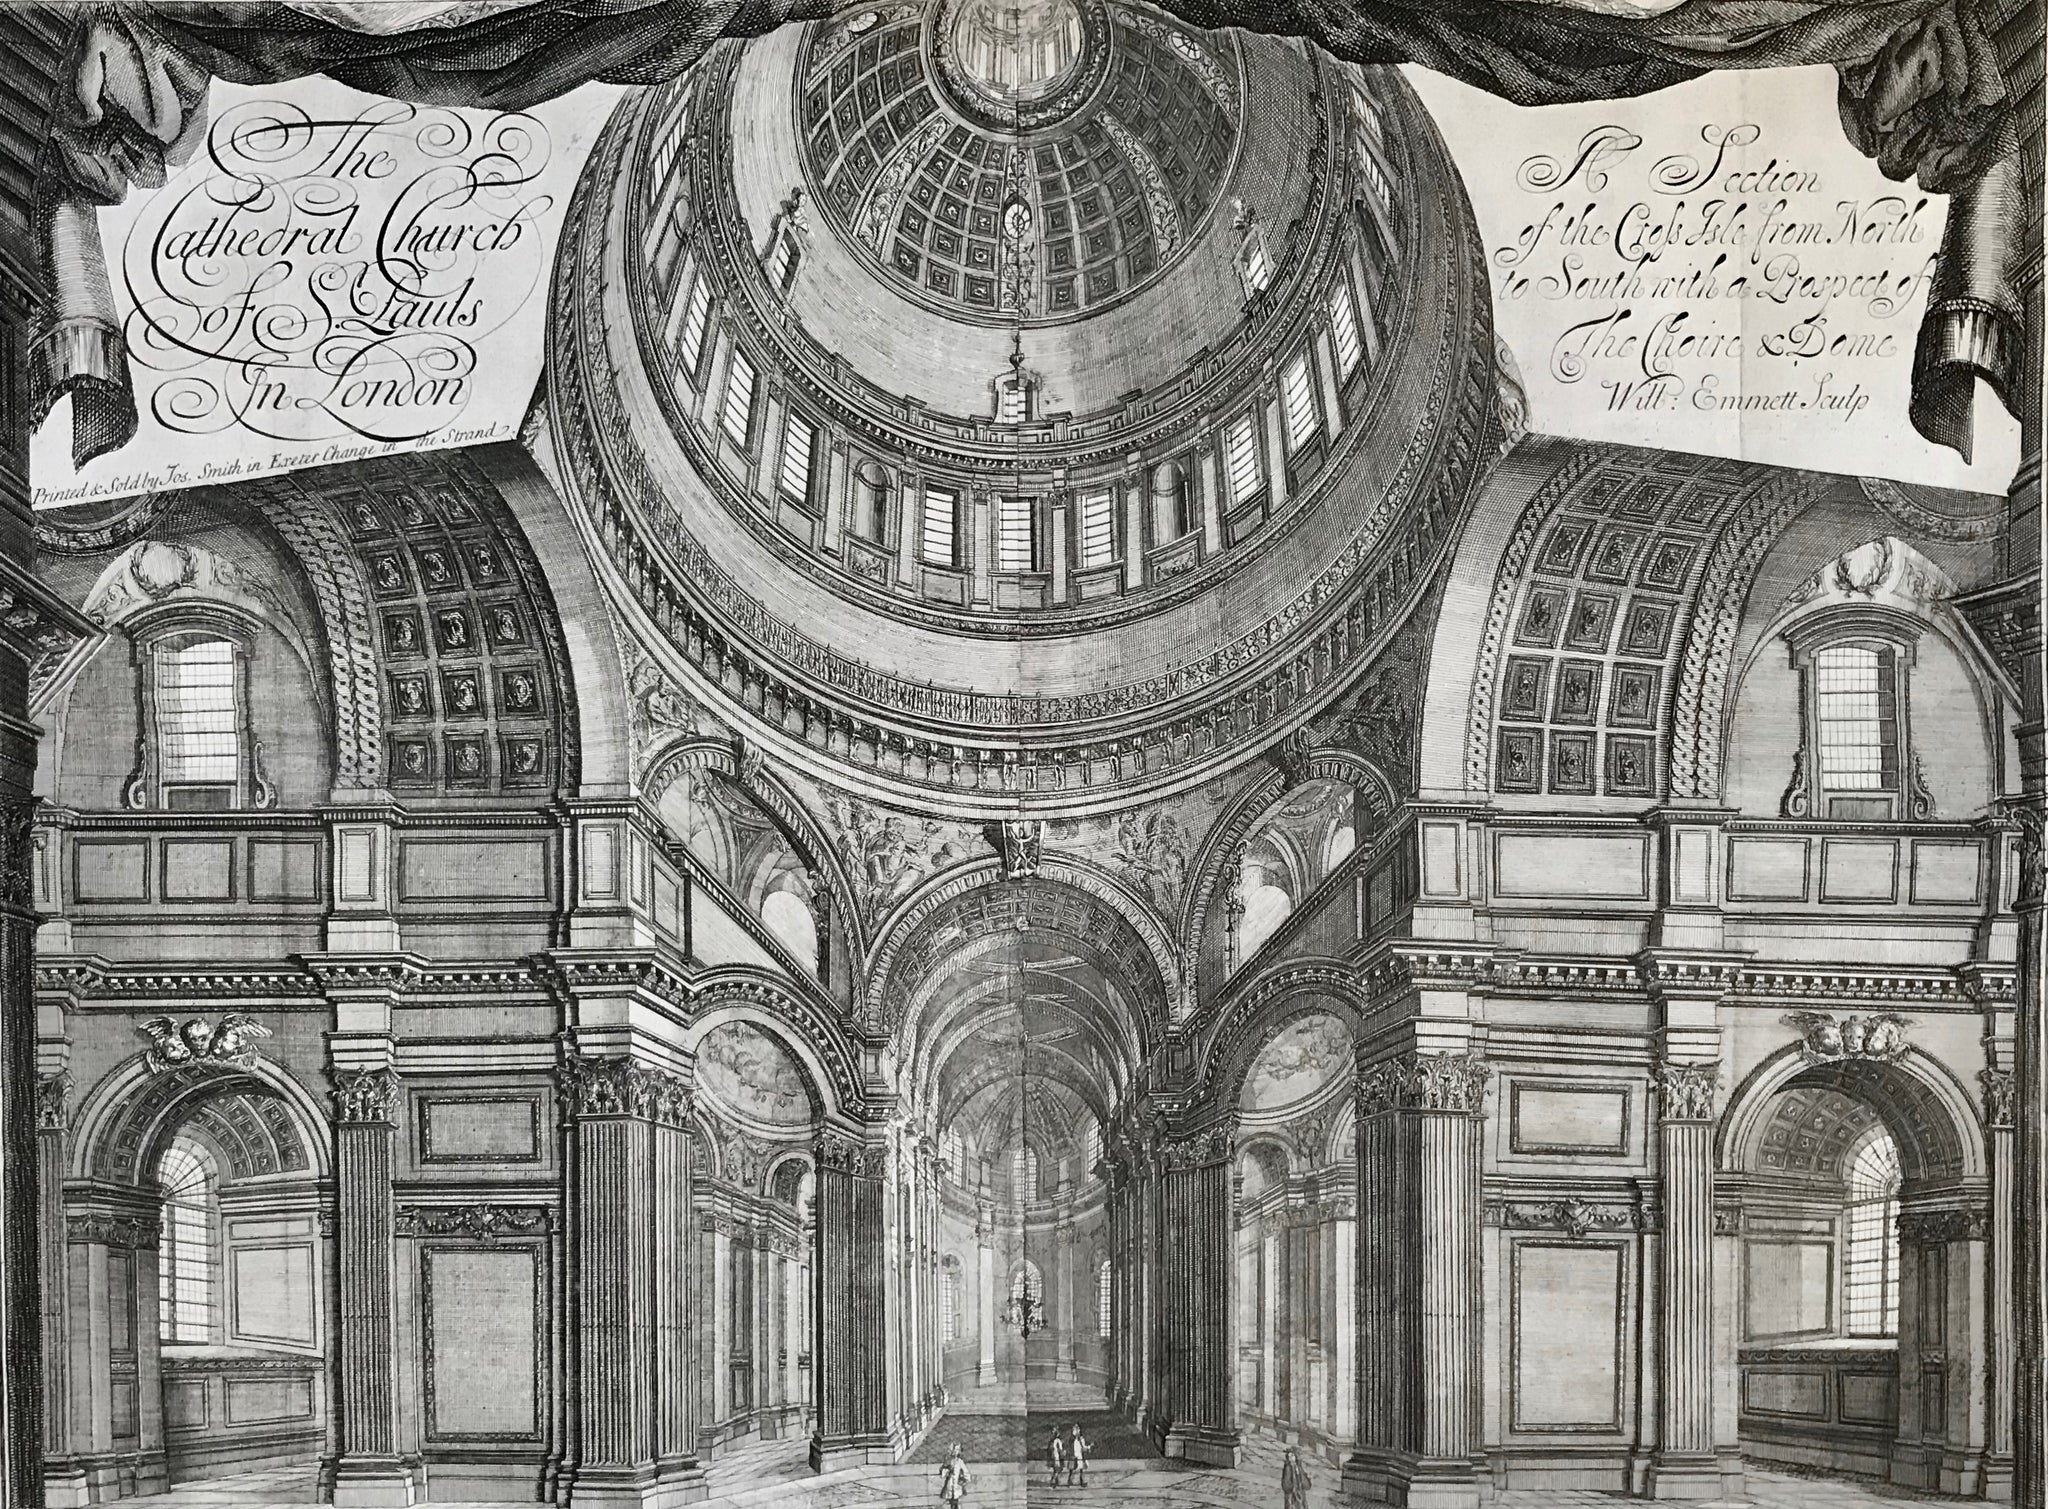 St. Paul's from the inside.  "The Cathedral Church of St. Paul's in London. A Section of the Cross Isle from North to South  with a Prospect of the Choire & Dome"  Copper etching by William Emmett (ca.1671-1736)  Publsied as single sheet print. Sold by I. Smith in Exeter Change on the Strand  London, ca. 1717  Architect Emmerett